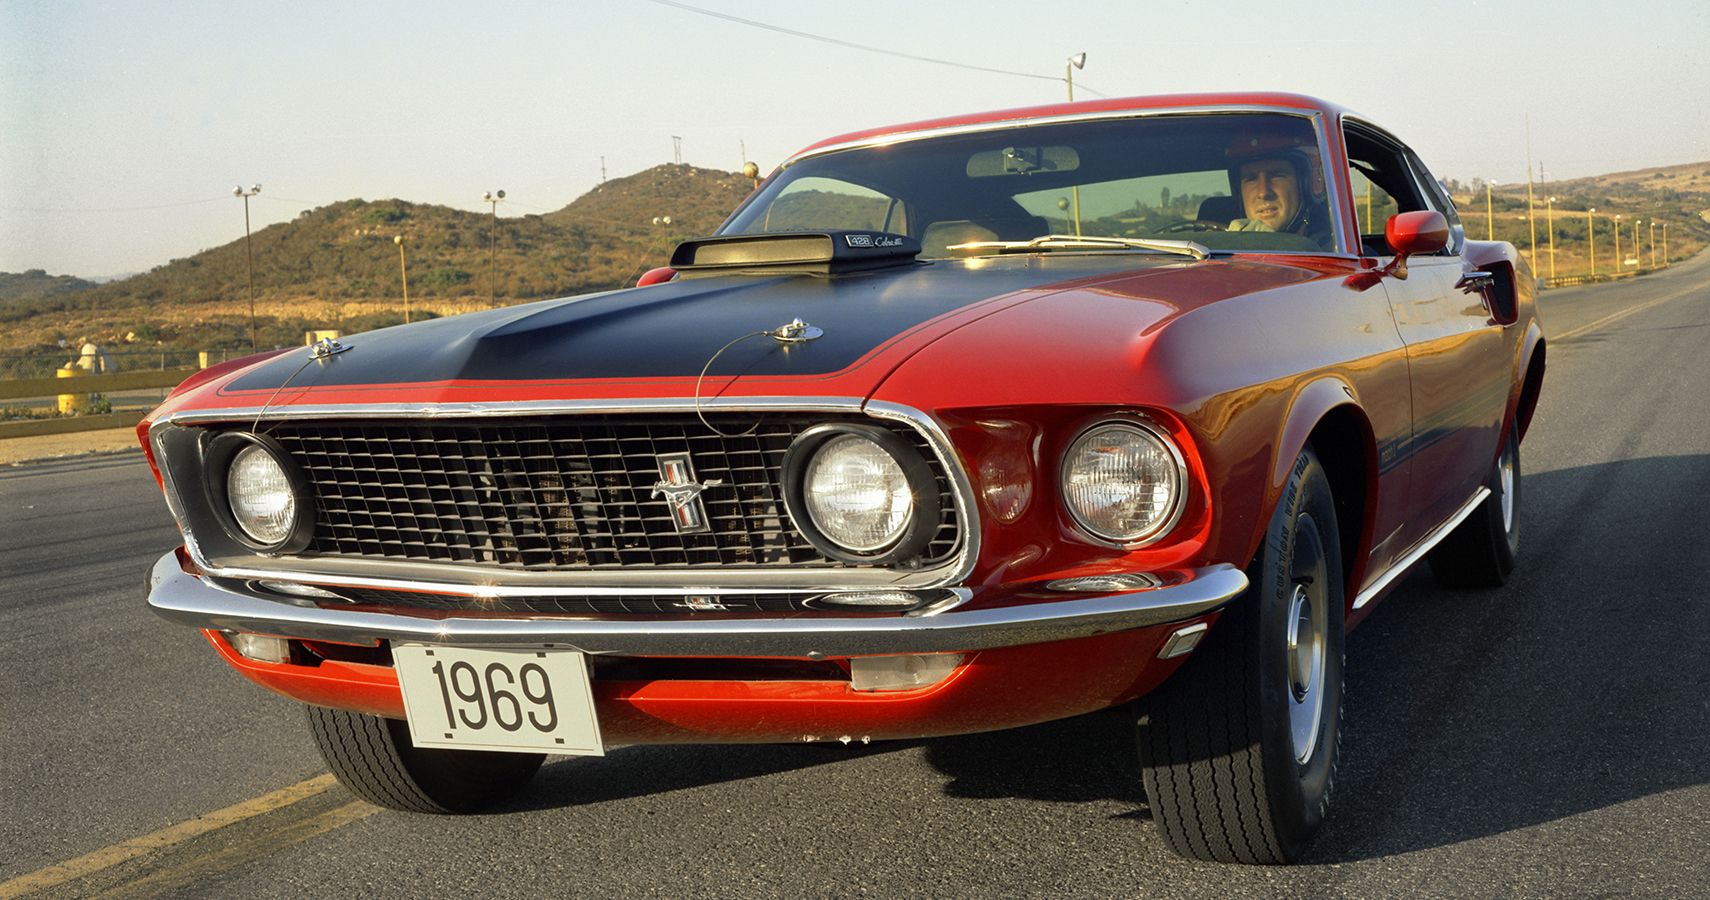 1969 Mustang Mach 1 On Road